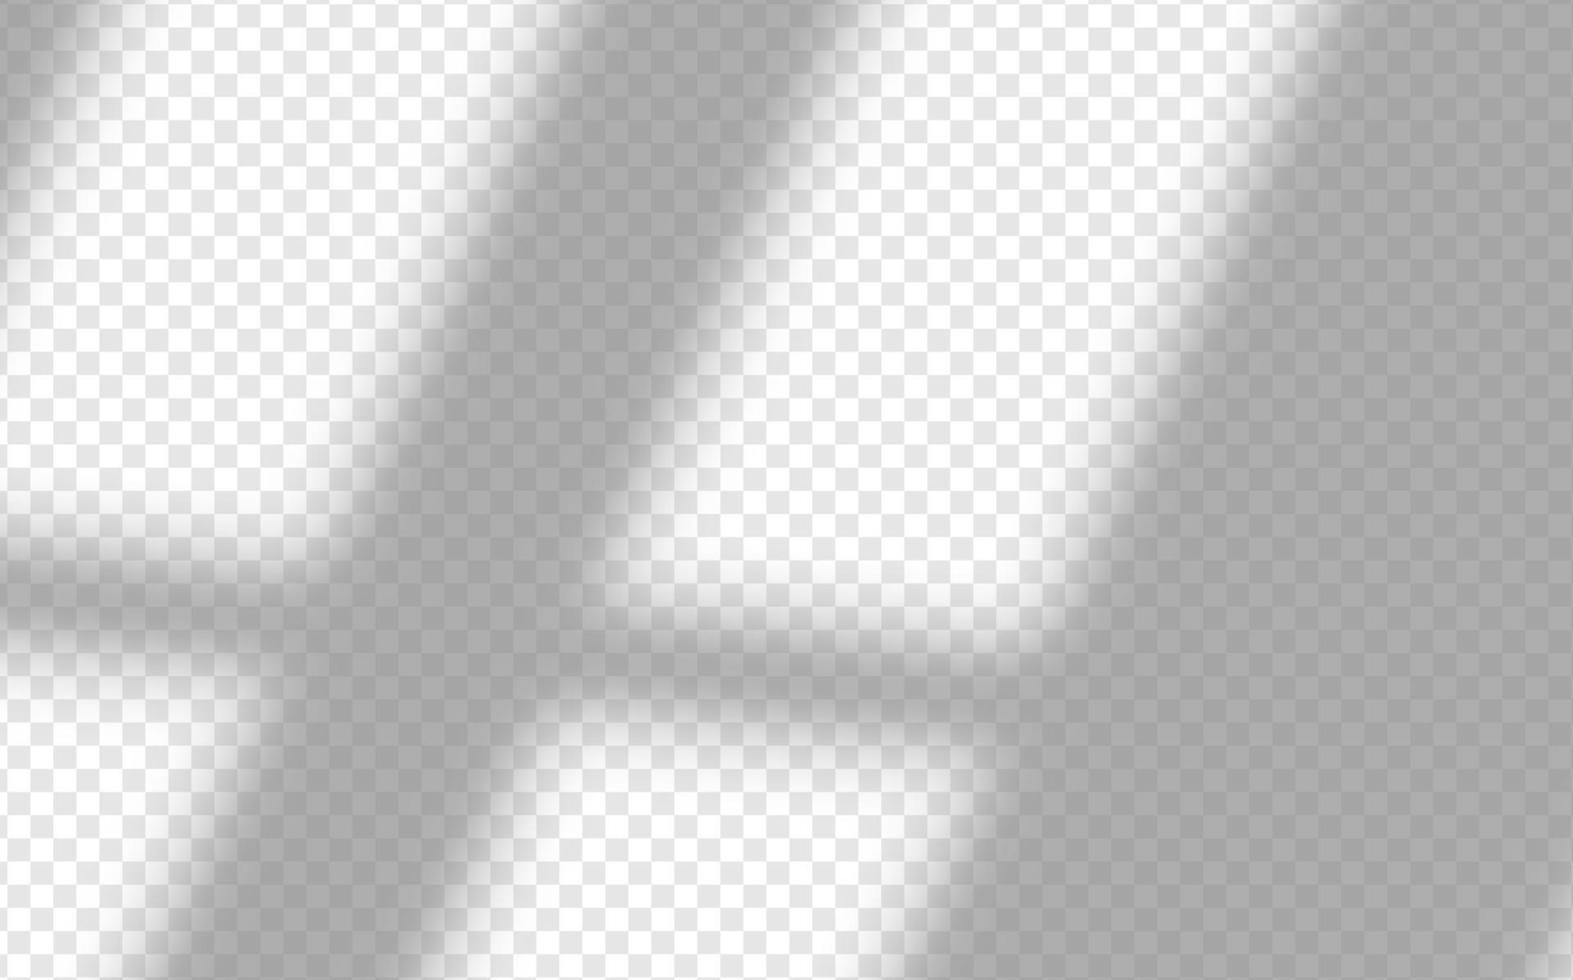 Soft shadow from the window form crystal rainbow  light and  flare transparent effects. Scenes of natural lighting. vector